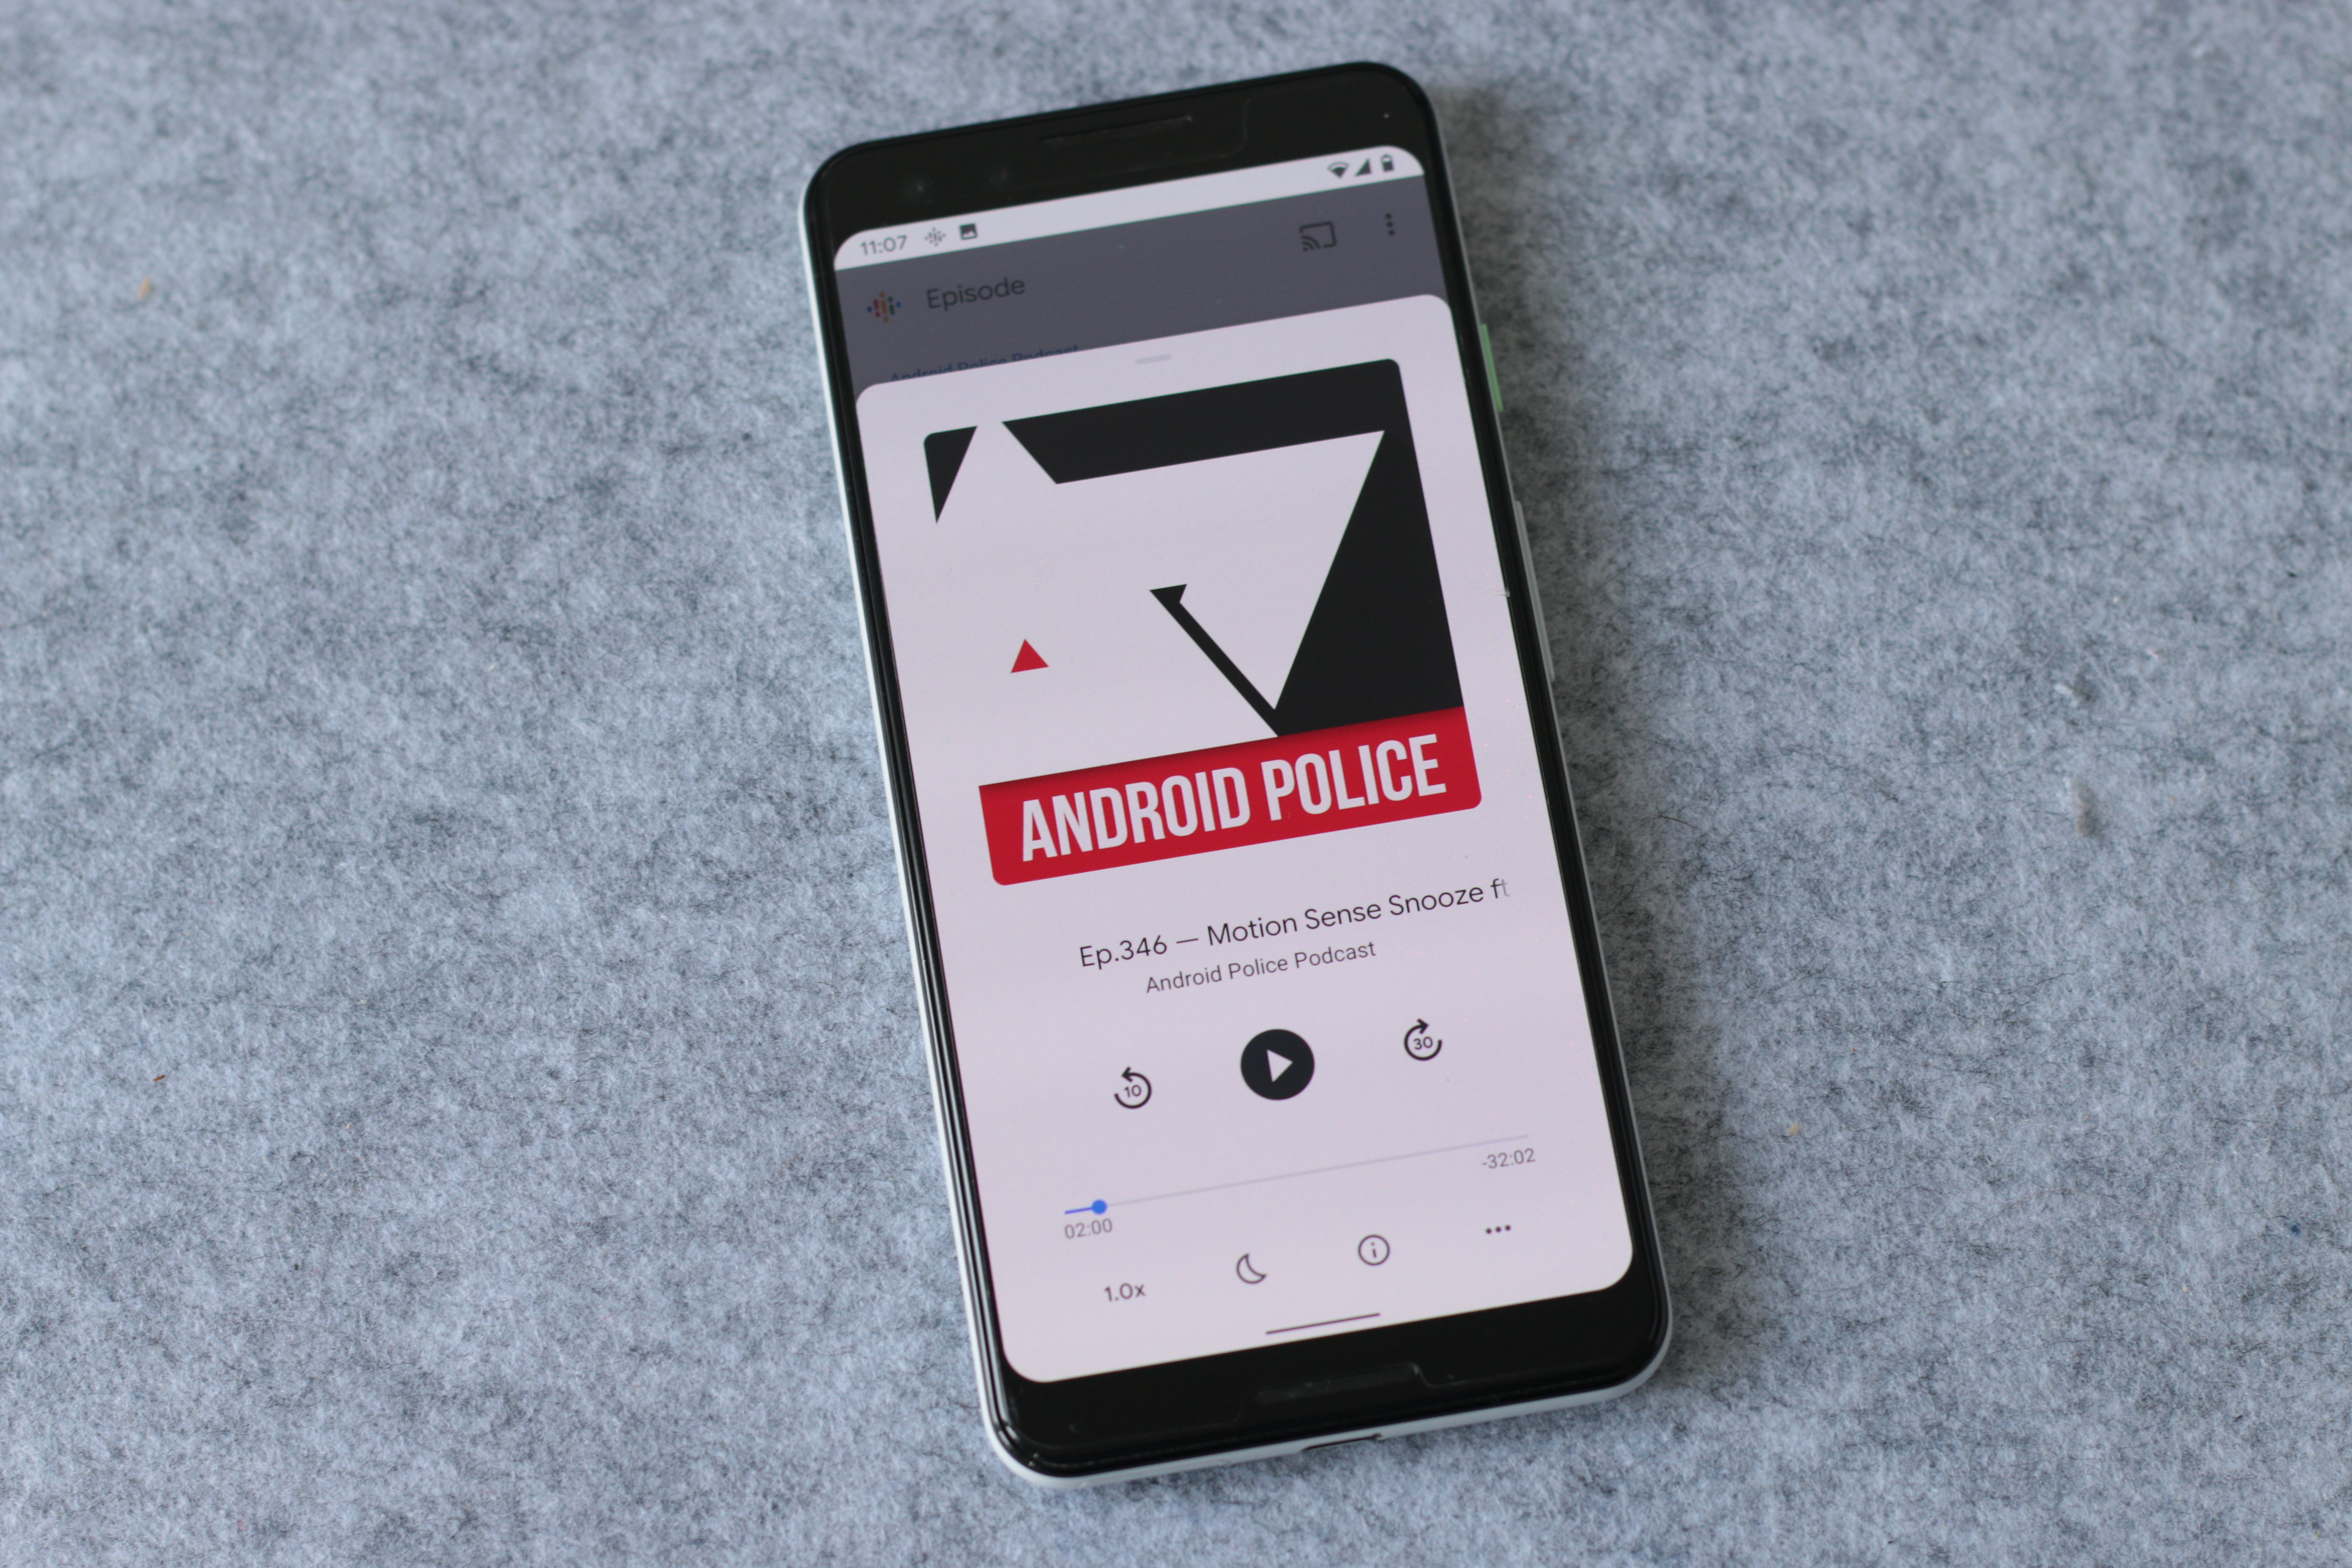 Google Podcasts on phone screen playing Android Police podcast